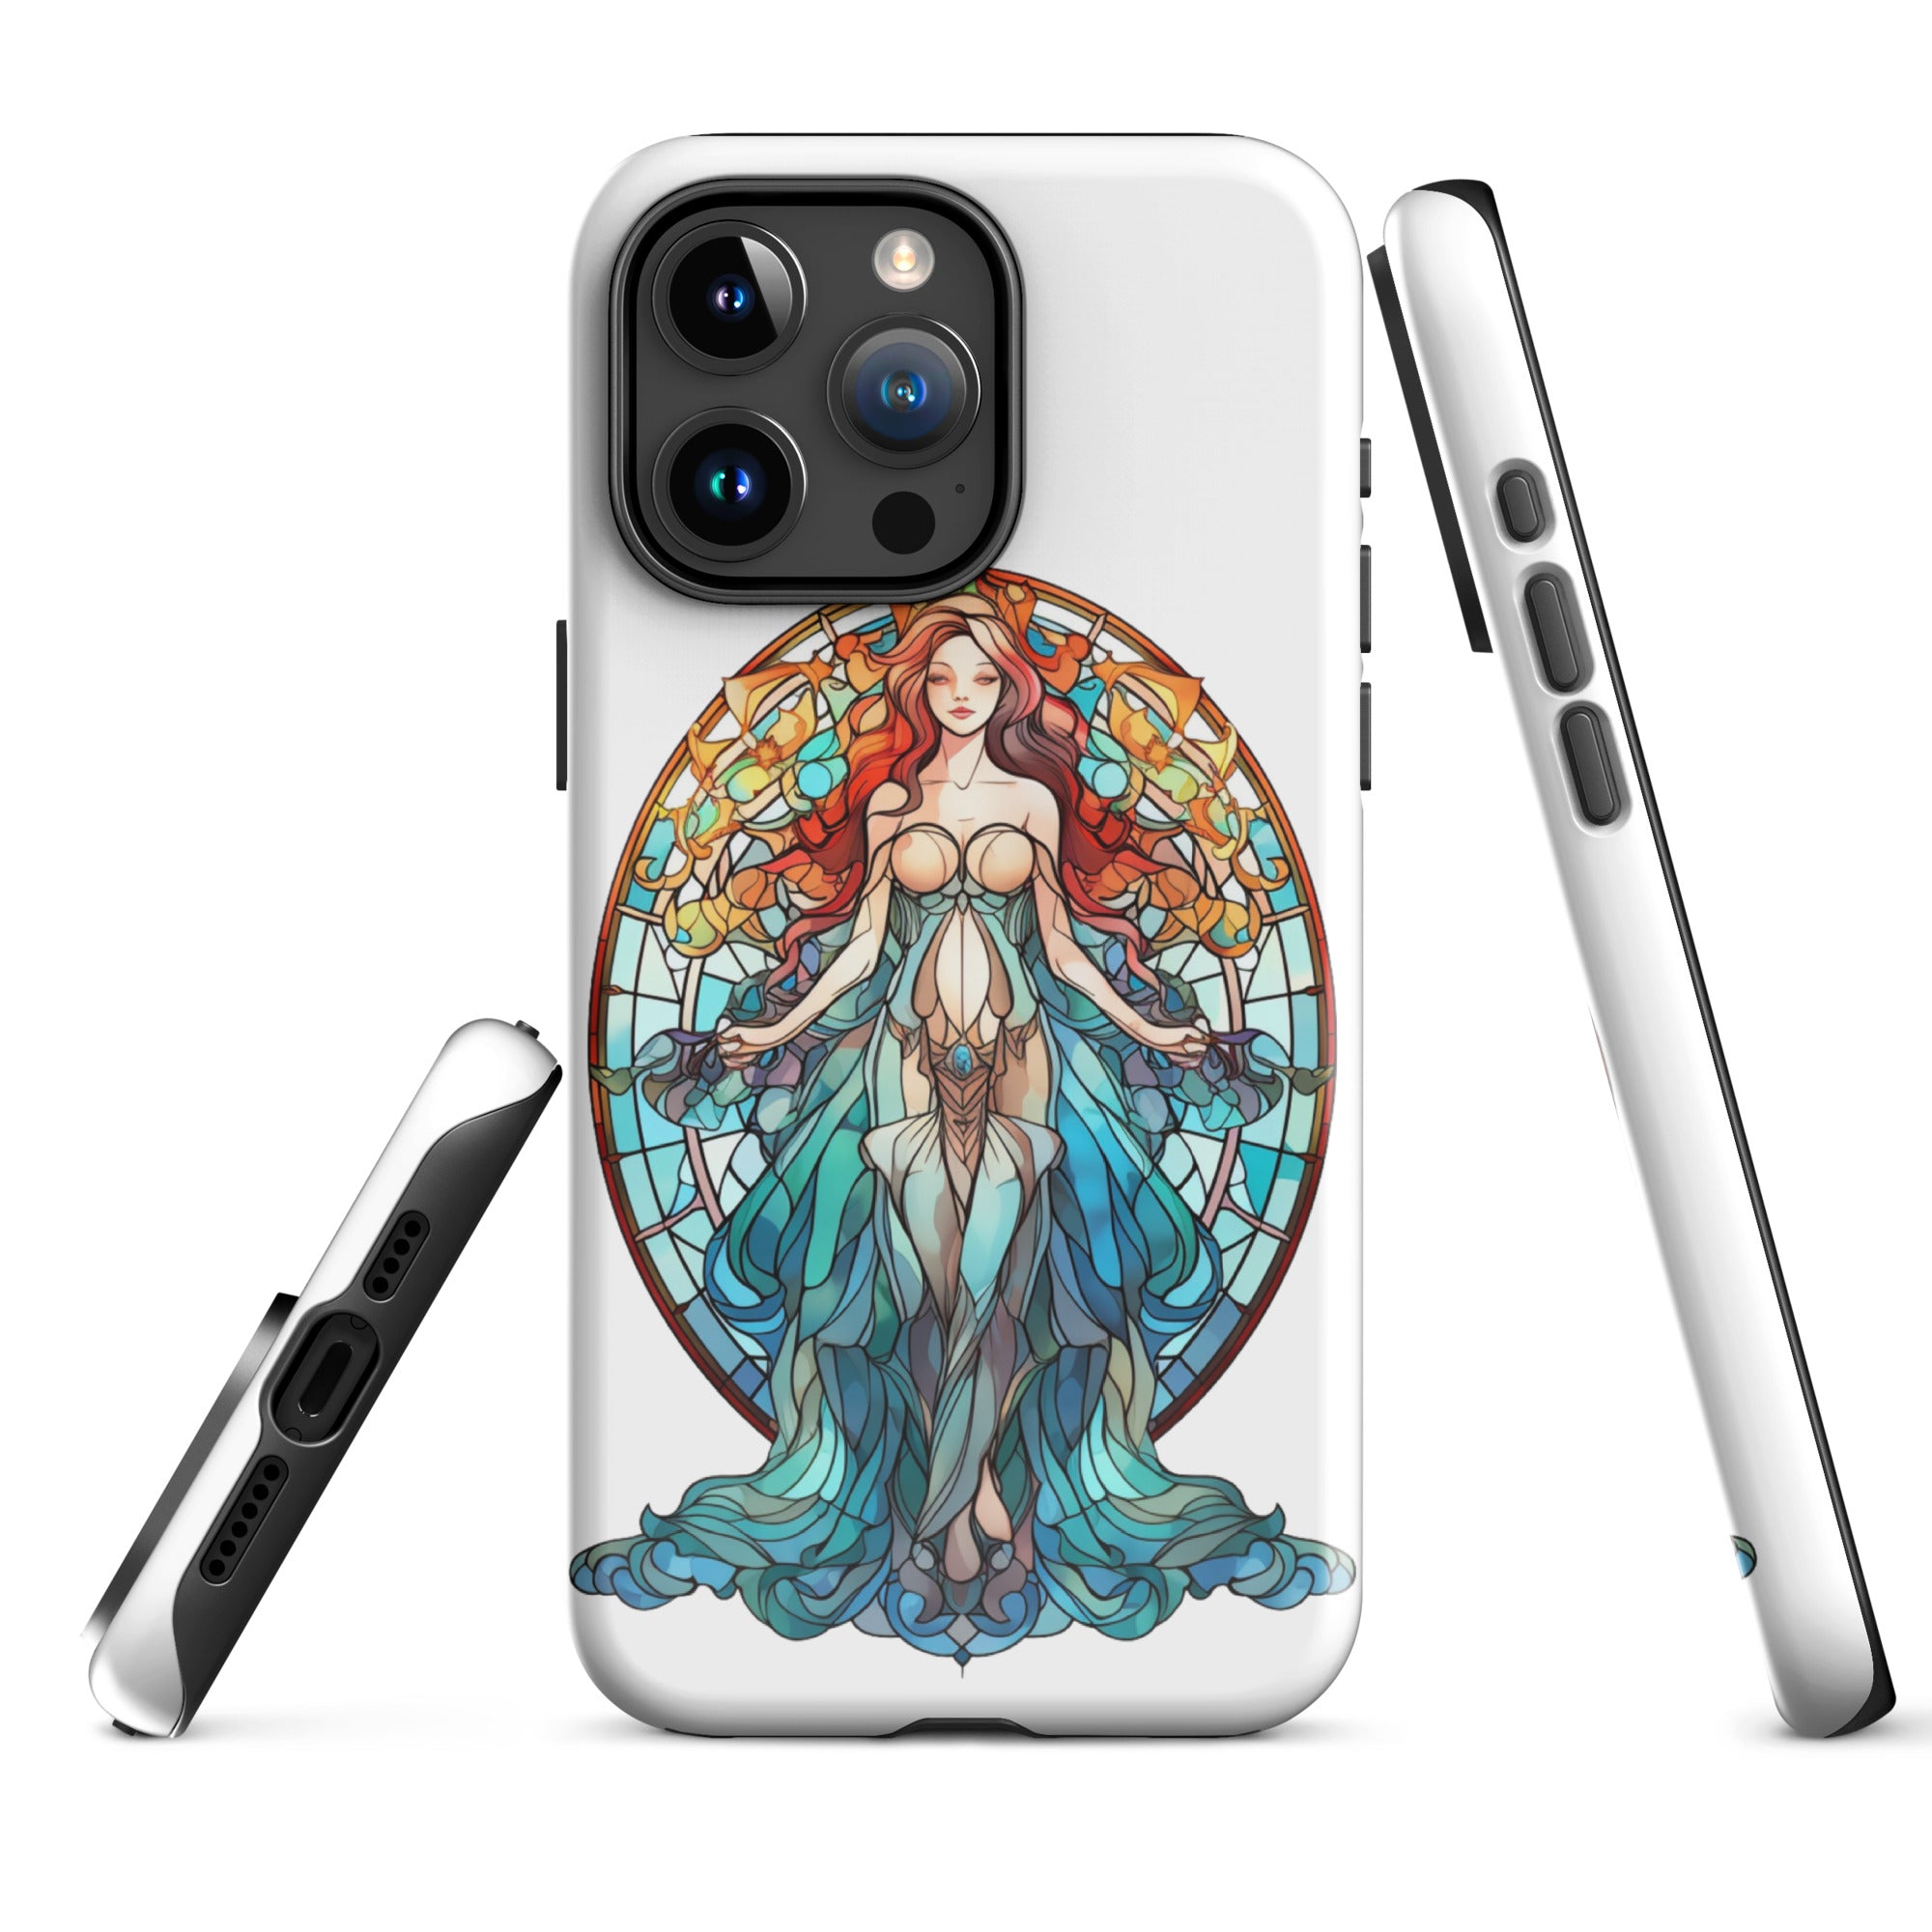 Tough Case for iPhone - Stained Glass